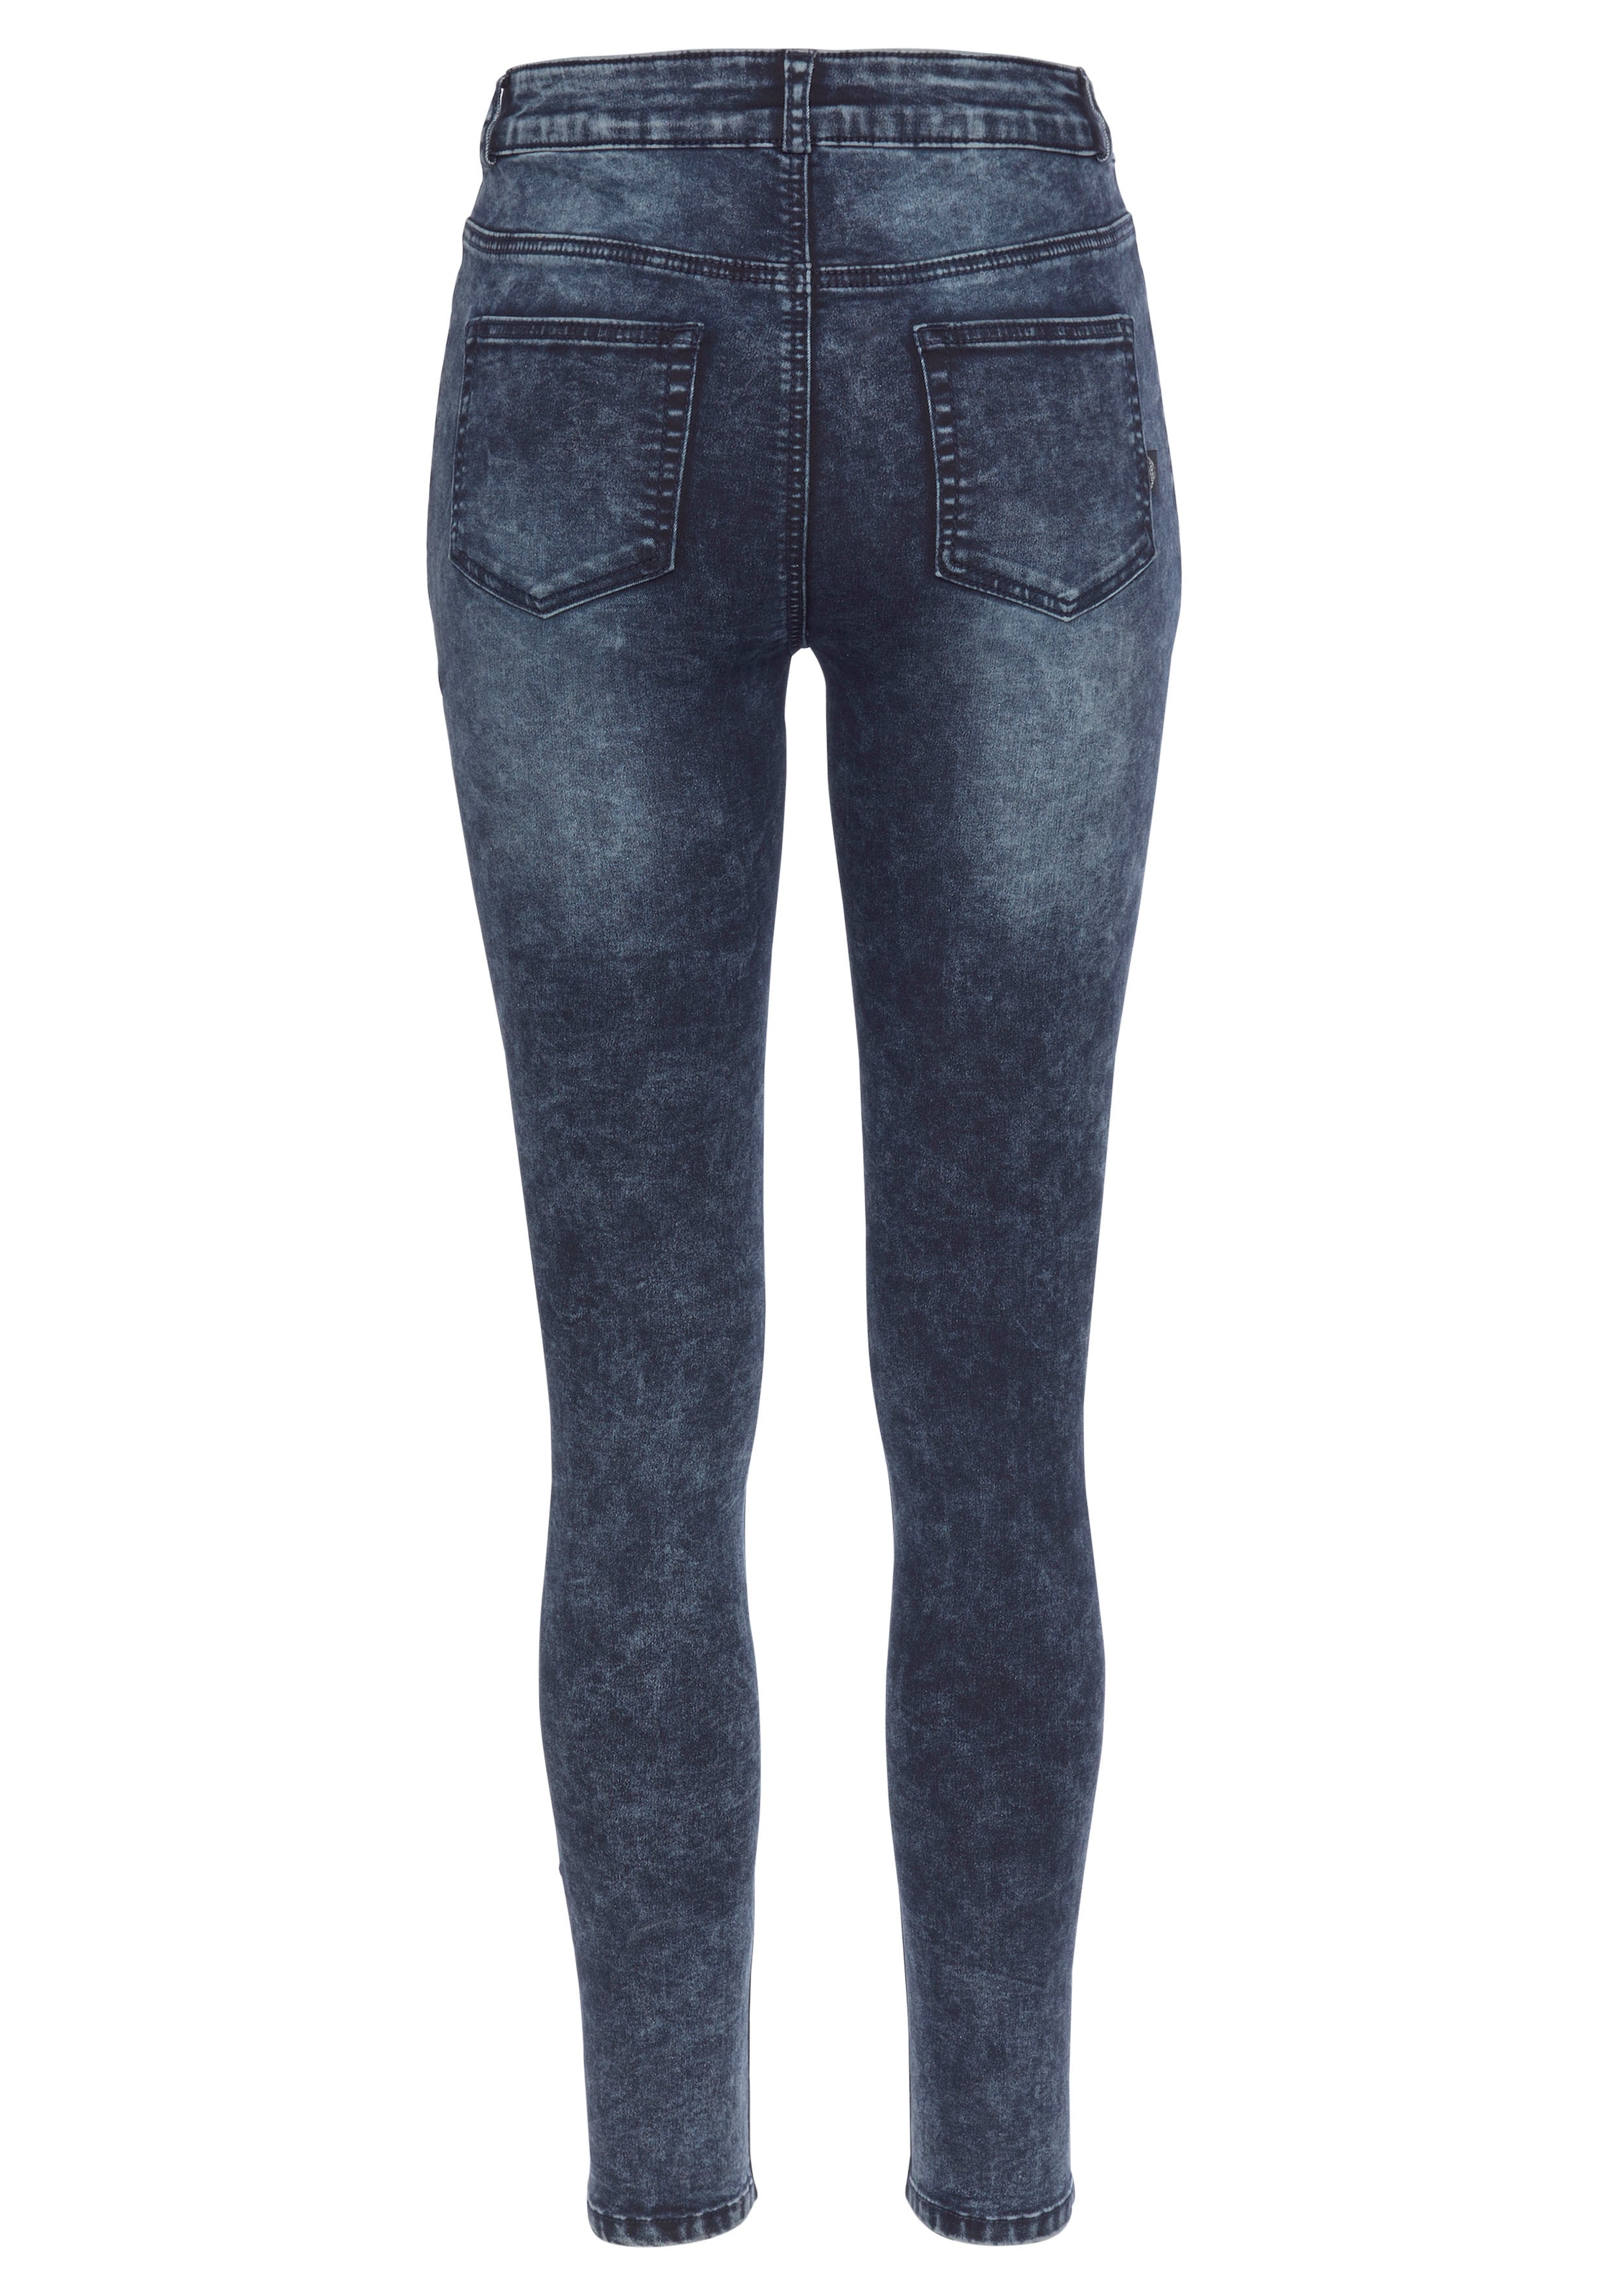 Arizona Skinny-fit-Jeans »Ultra Stretch moon shoppen walking | Moonwashed washed«, I\'m Jeans